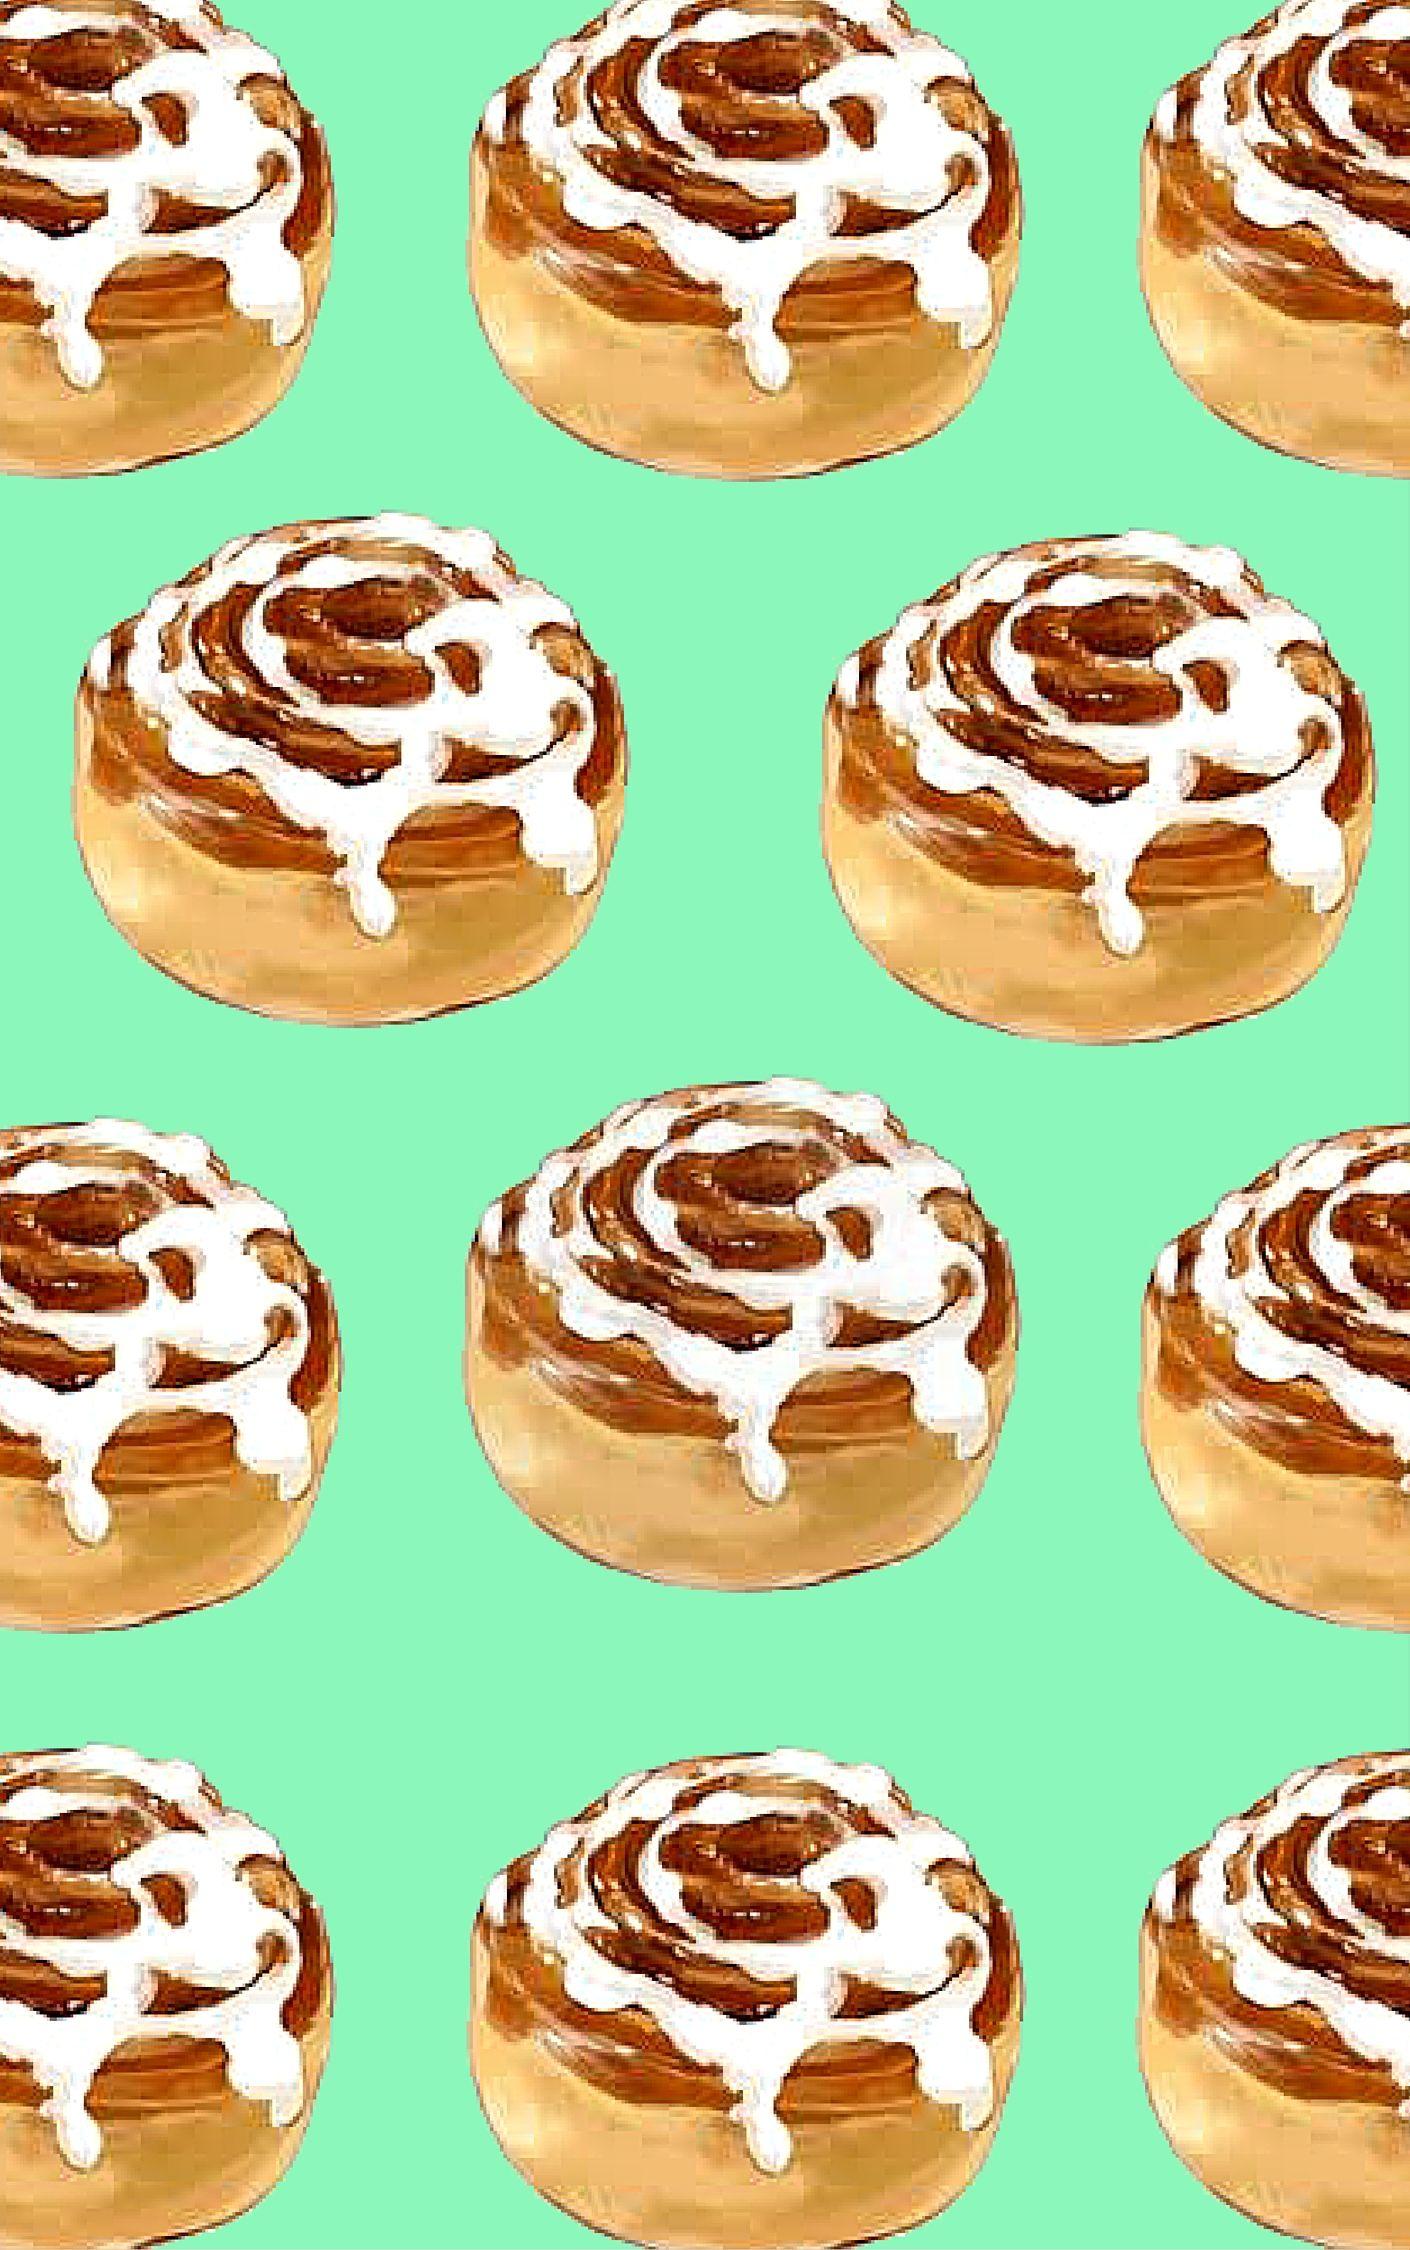 iPhone, Android wallpaper. Cinnamon rolls by Shae Apollo. #tumblr